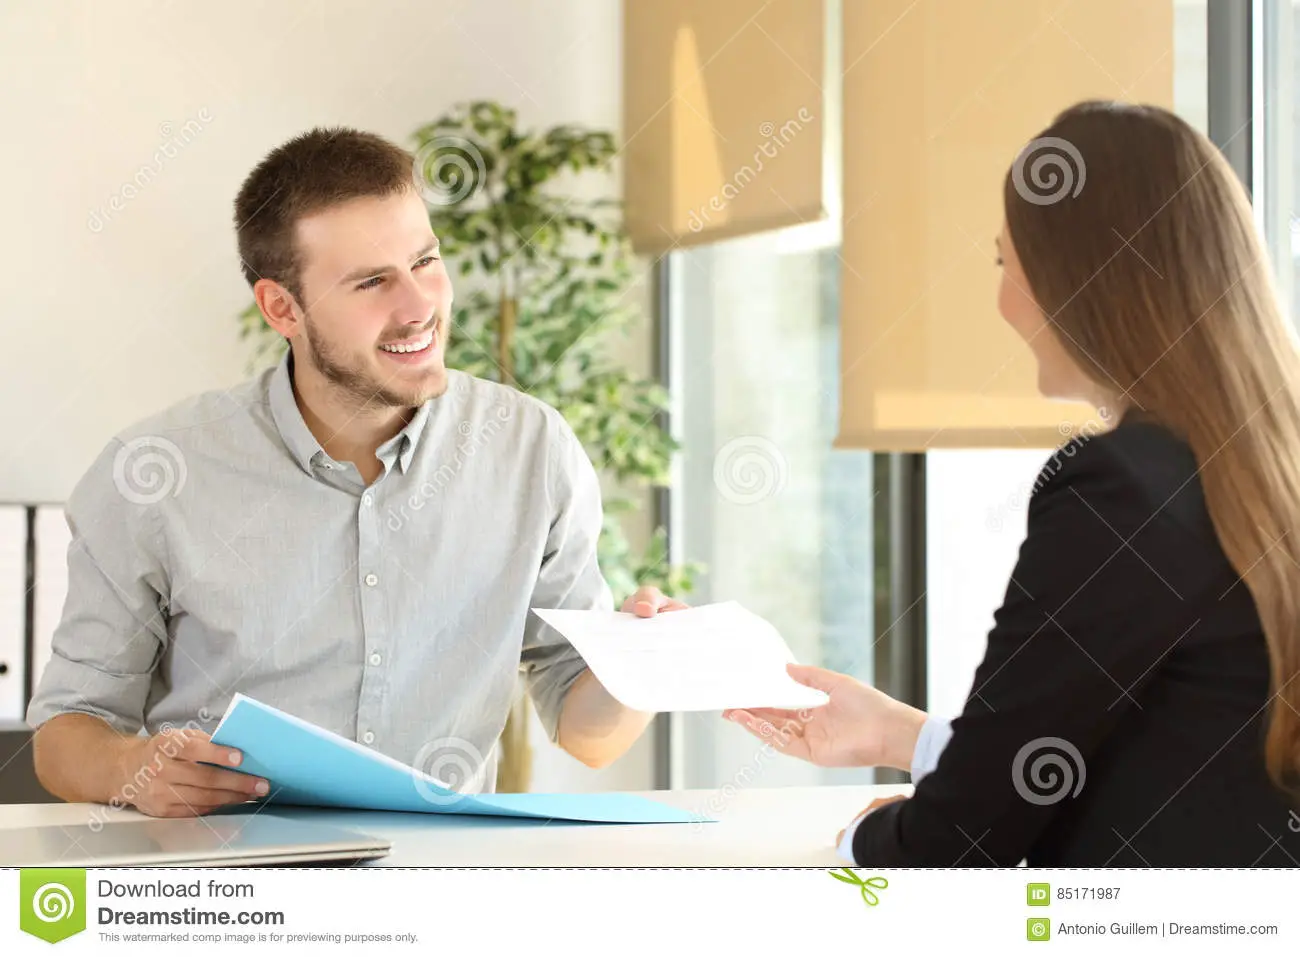 Man Giving Resume In A Job Interview Stock Image